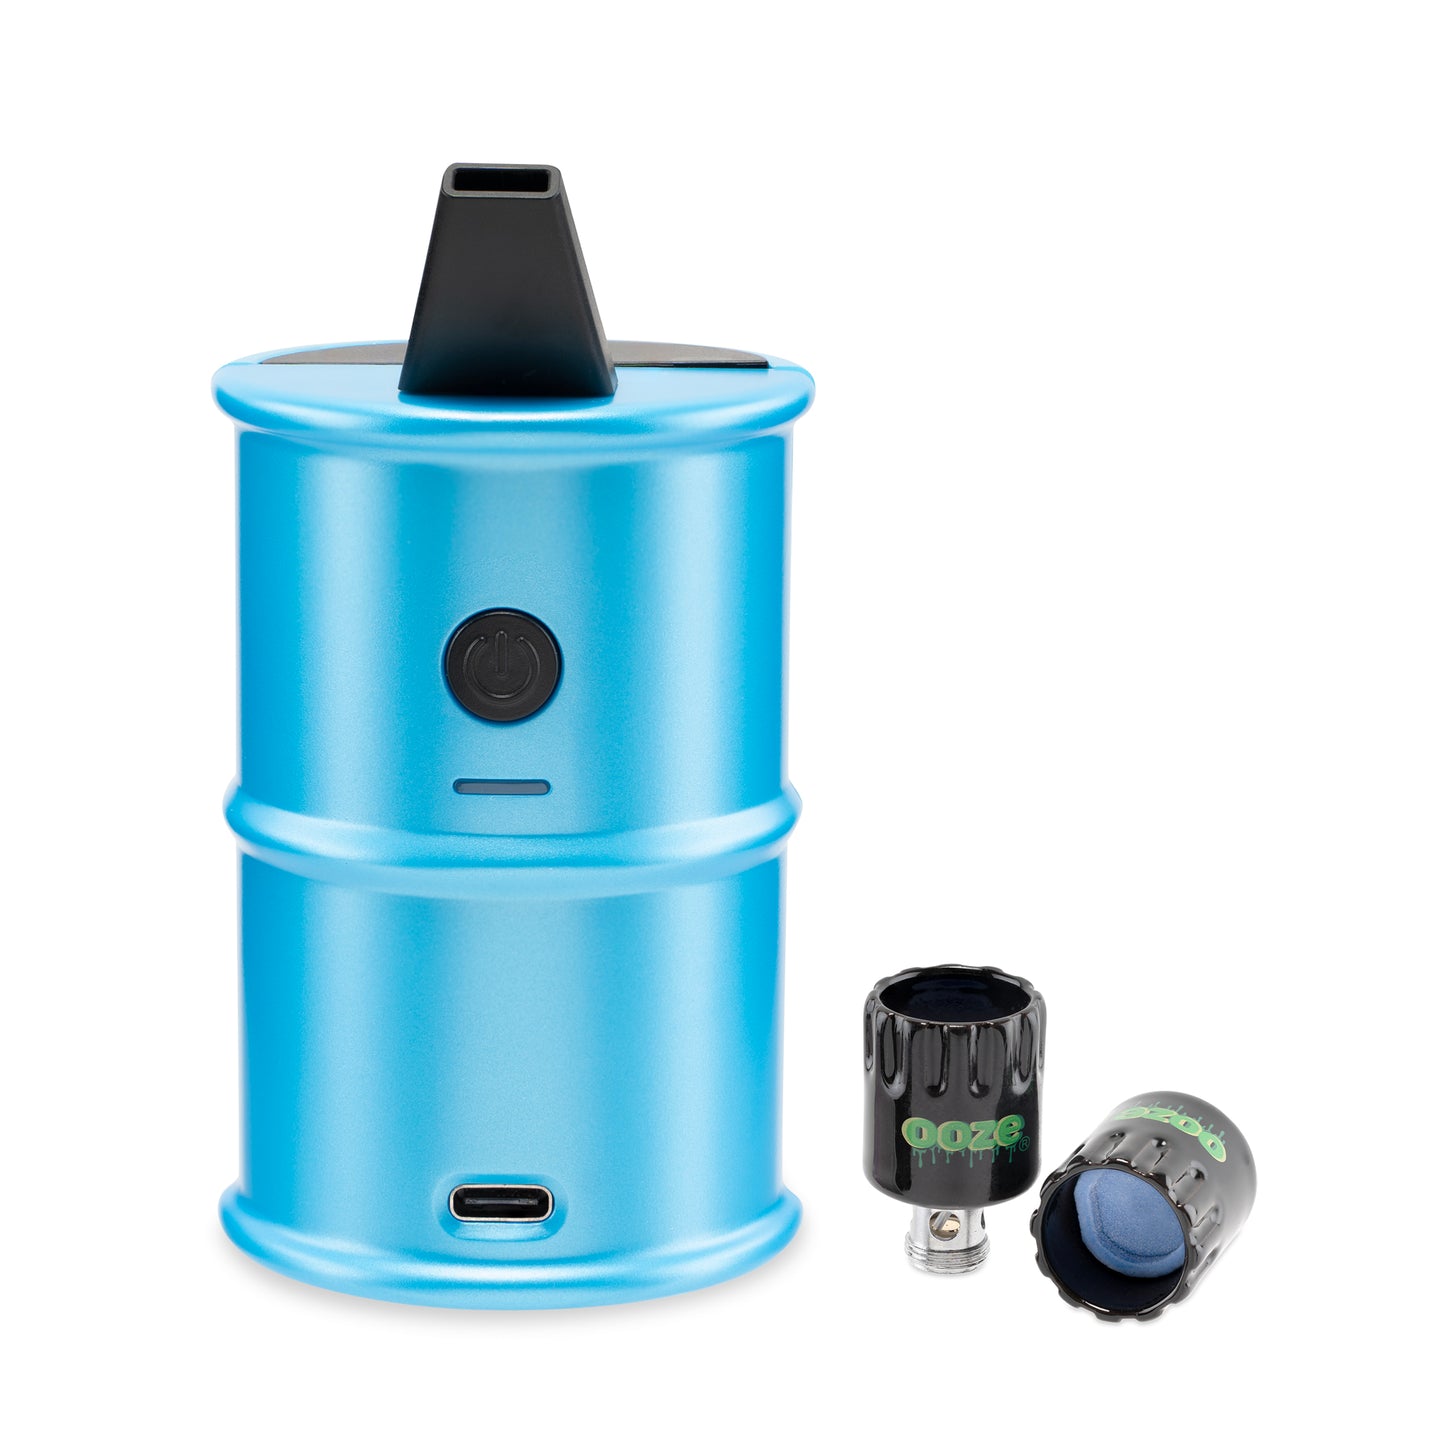 The Arctic Blue Ooze Electro Barrel E-Rig is shown next to the 2 replacement Onyx Atomizers.